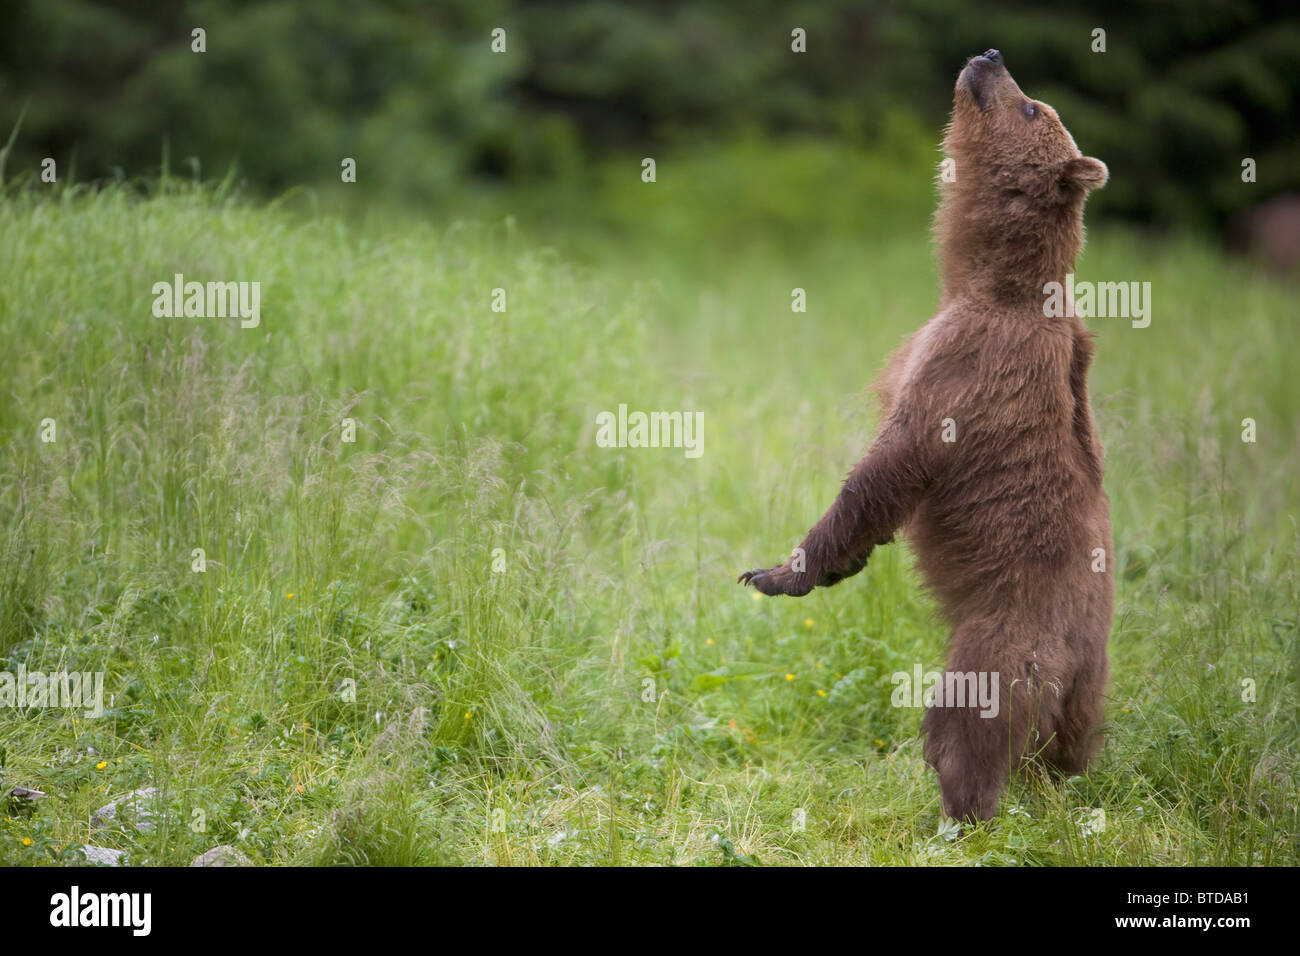 Brown bear standing upright and sniffing the air, Prince William Sound, Chugach Mountains, Chugach National Forest, Alaska, Stock Photo